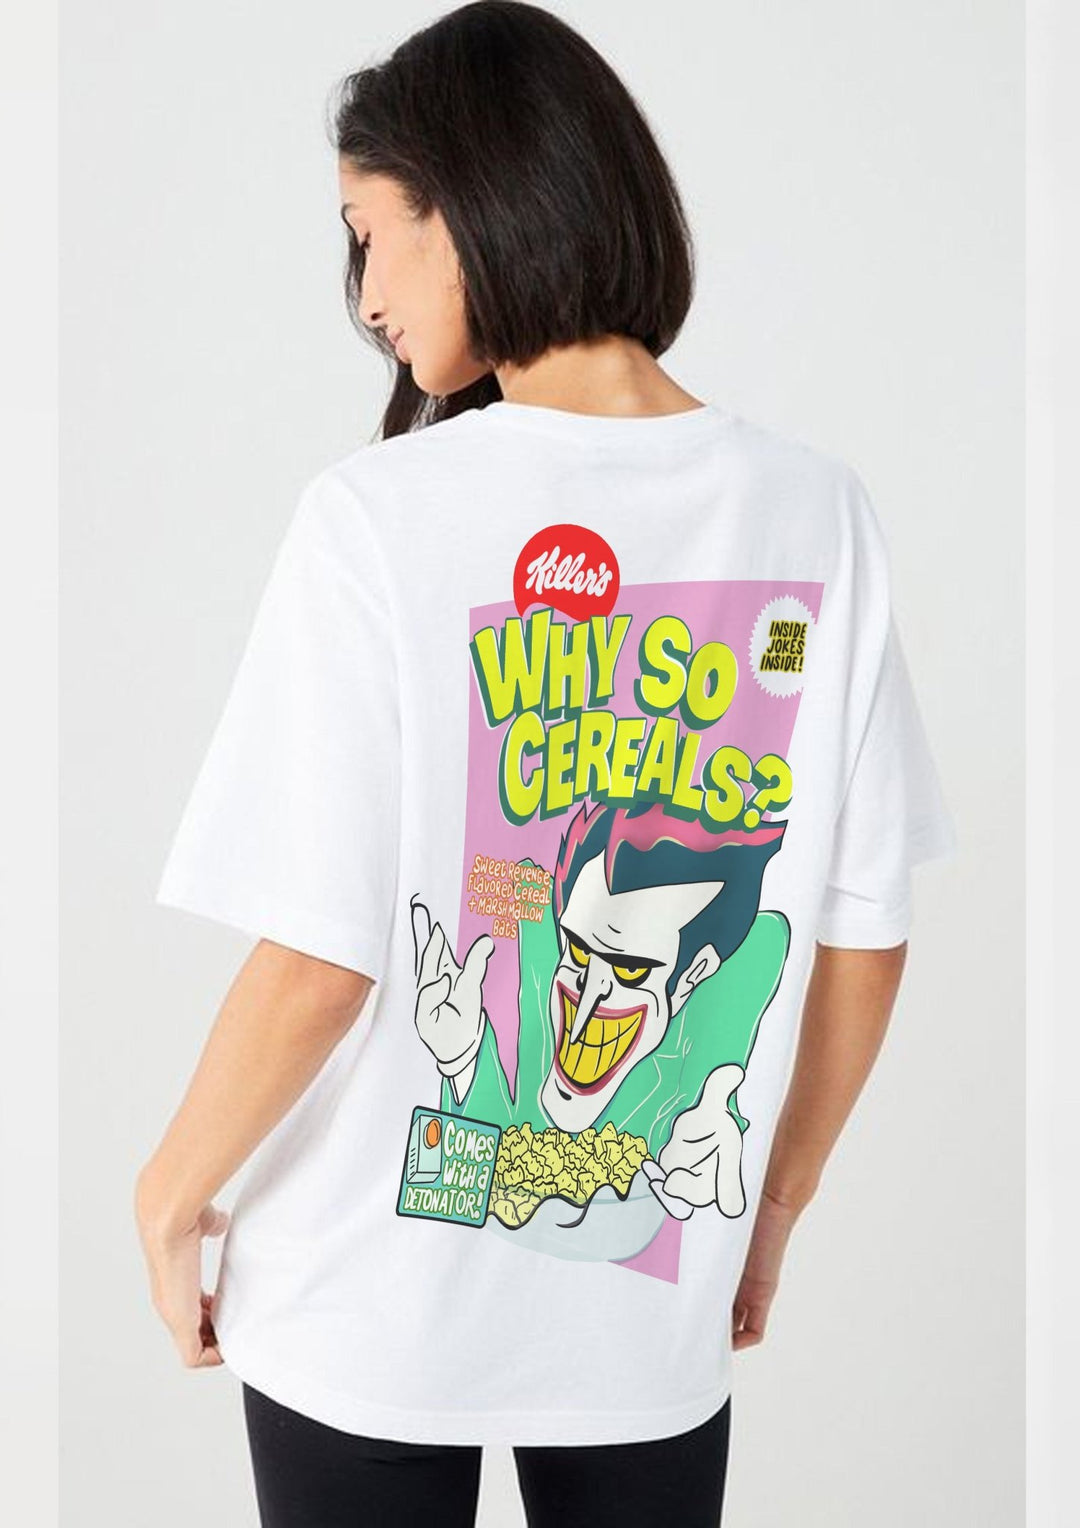 Why So Cereals T - shirt - White - The Quirky Naari